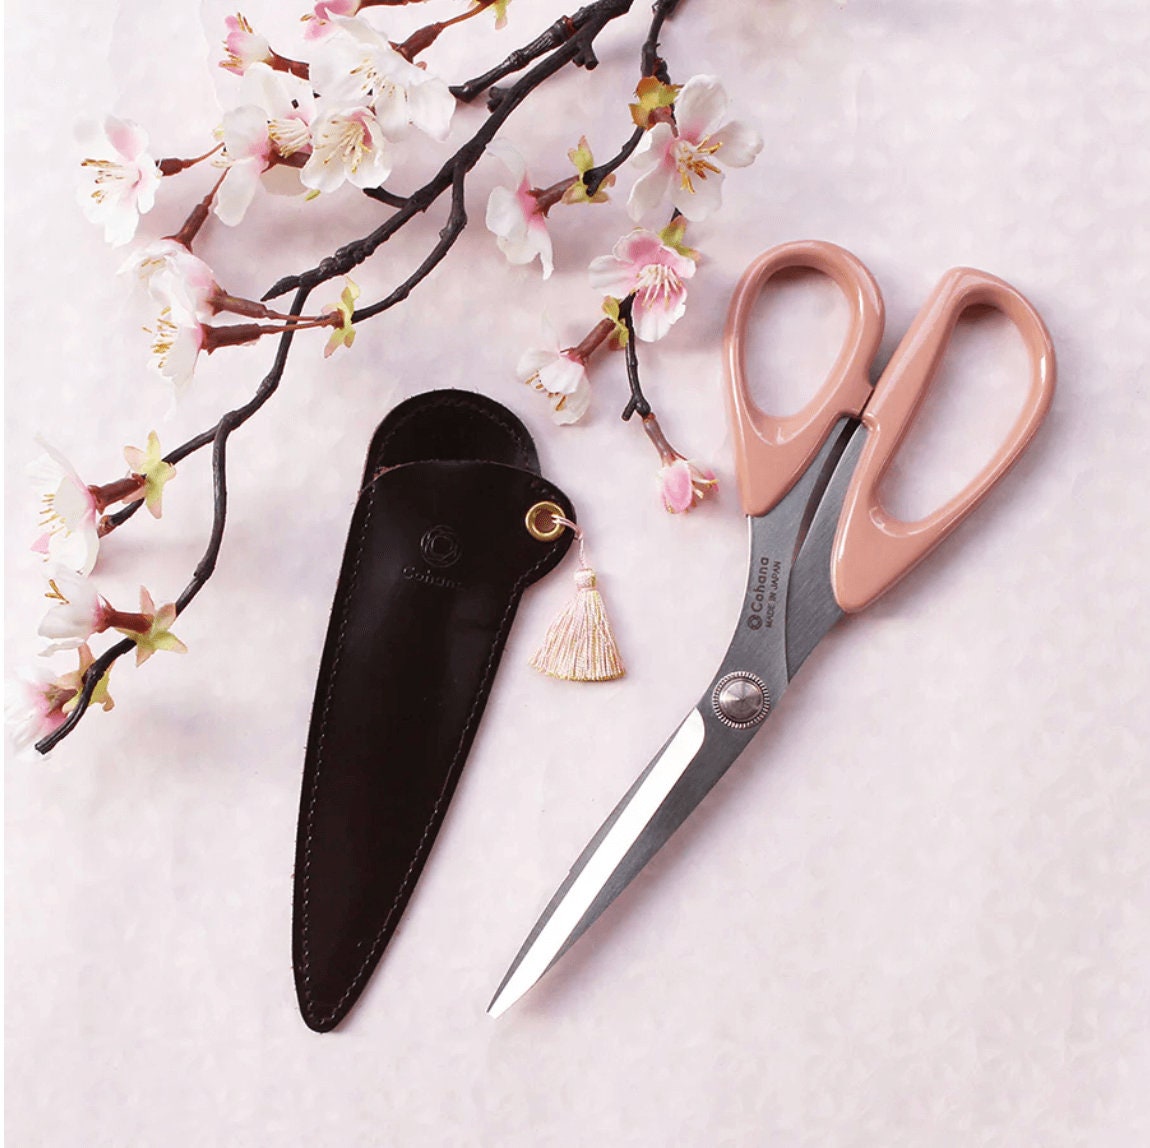 Small Black Embroidery Scissors With Round Circular Handles, Sewing Scissors,  Snips 